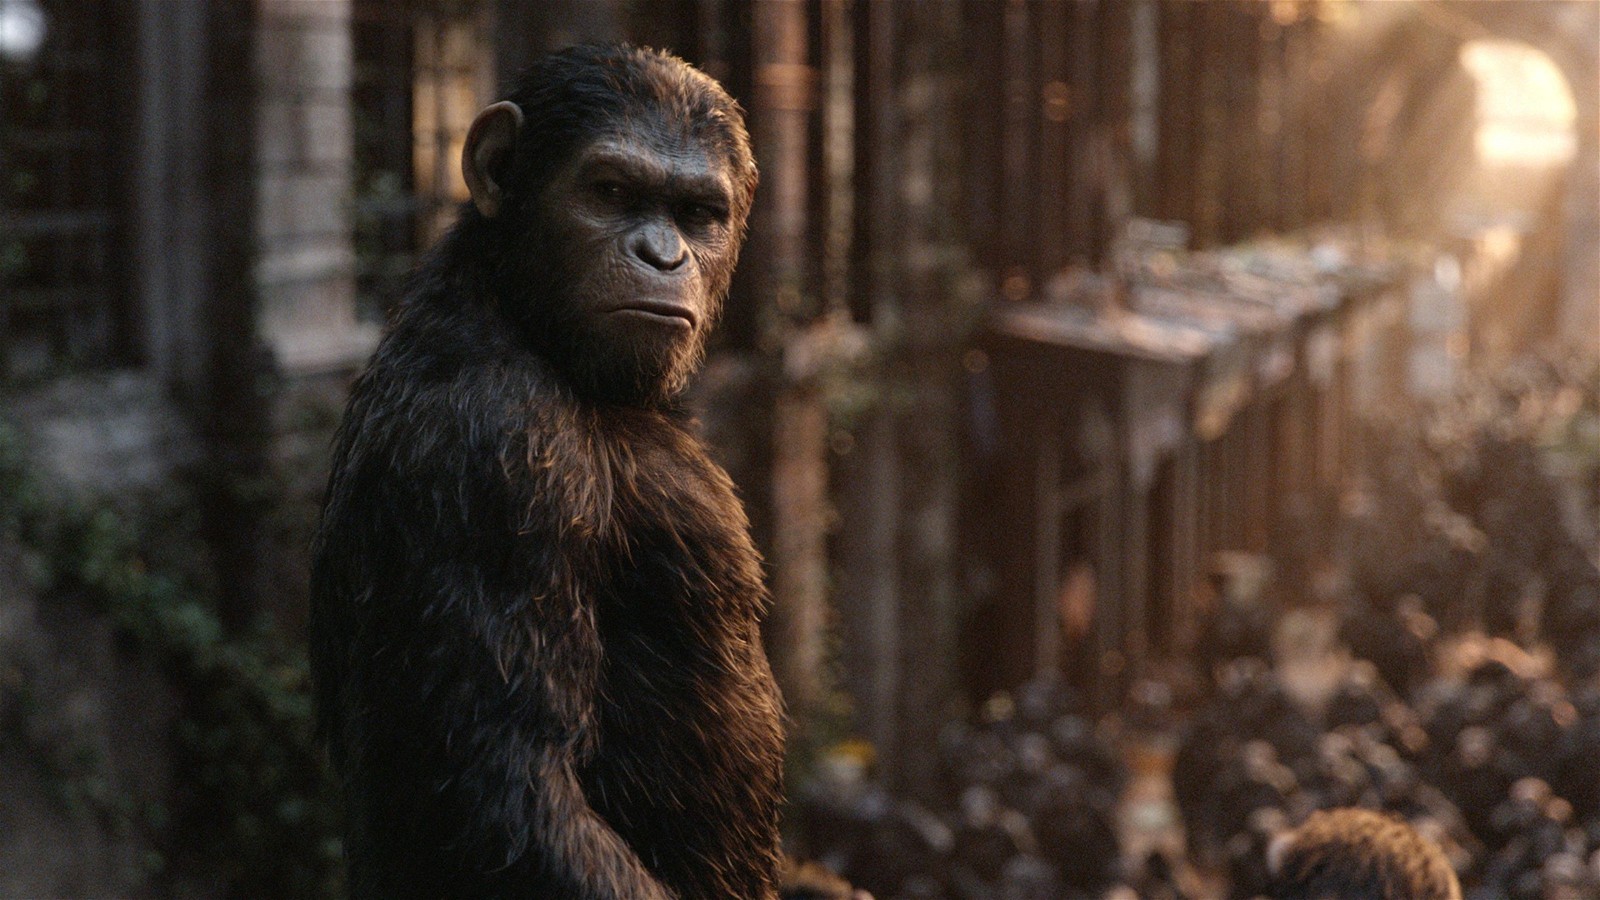 Caesar overlooking the community in Dawn of the Planet of the Apes (2014)